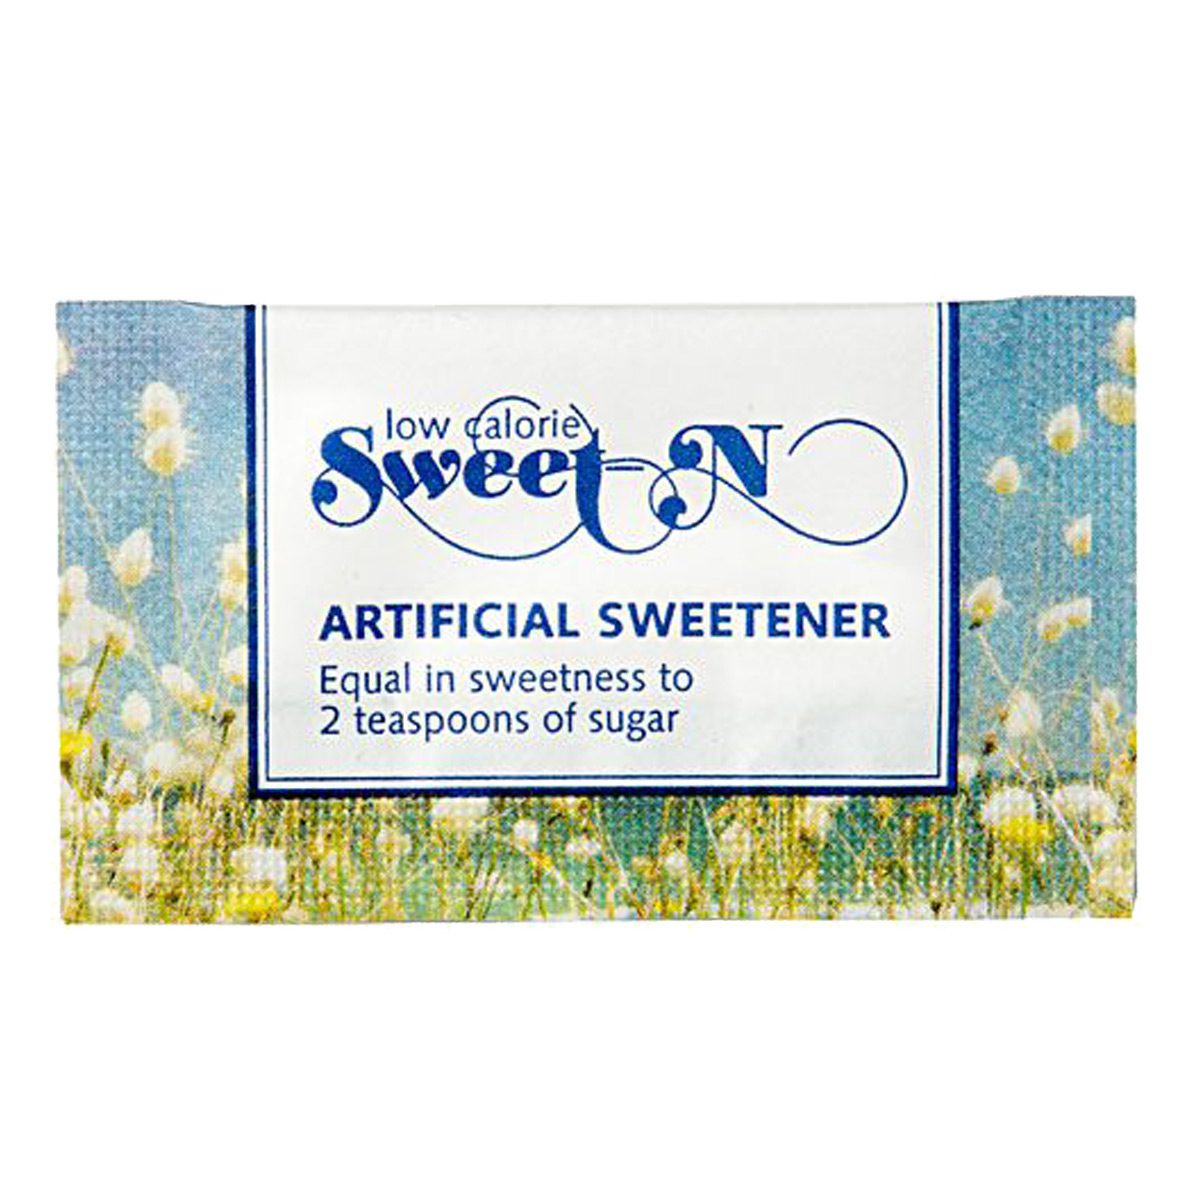 consumables-hospitality-beverage-food-sweet-n-artifical -sweetener-sachet-x750-equivalent-2-teaspoons-sugar-almost-no-calories-degradable-packaging-film-breaks-down-faster-vjs-distributors-HPAS